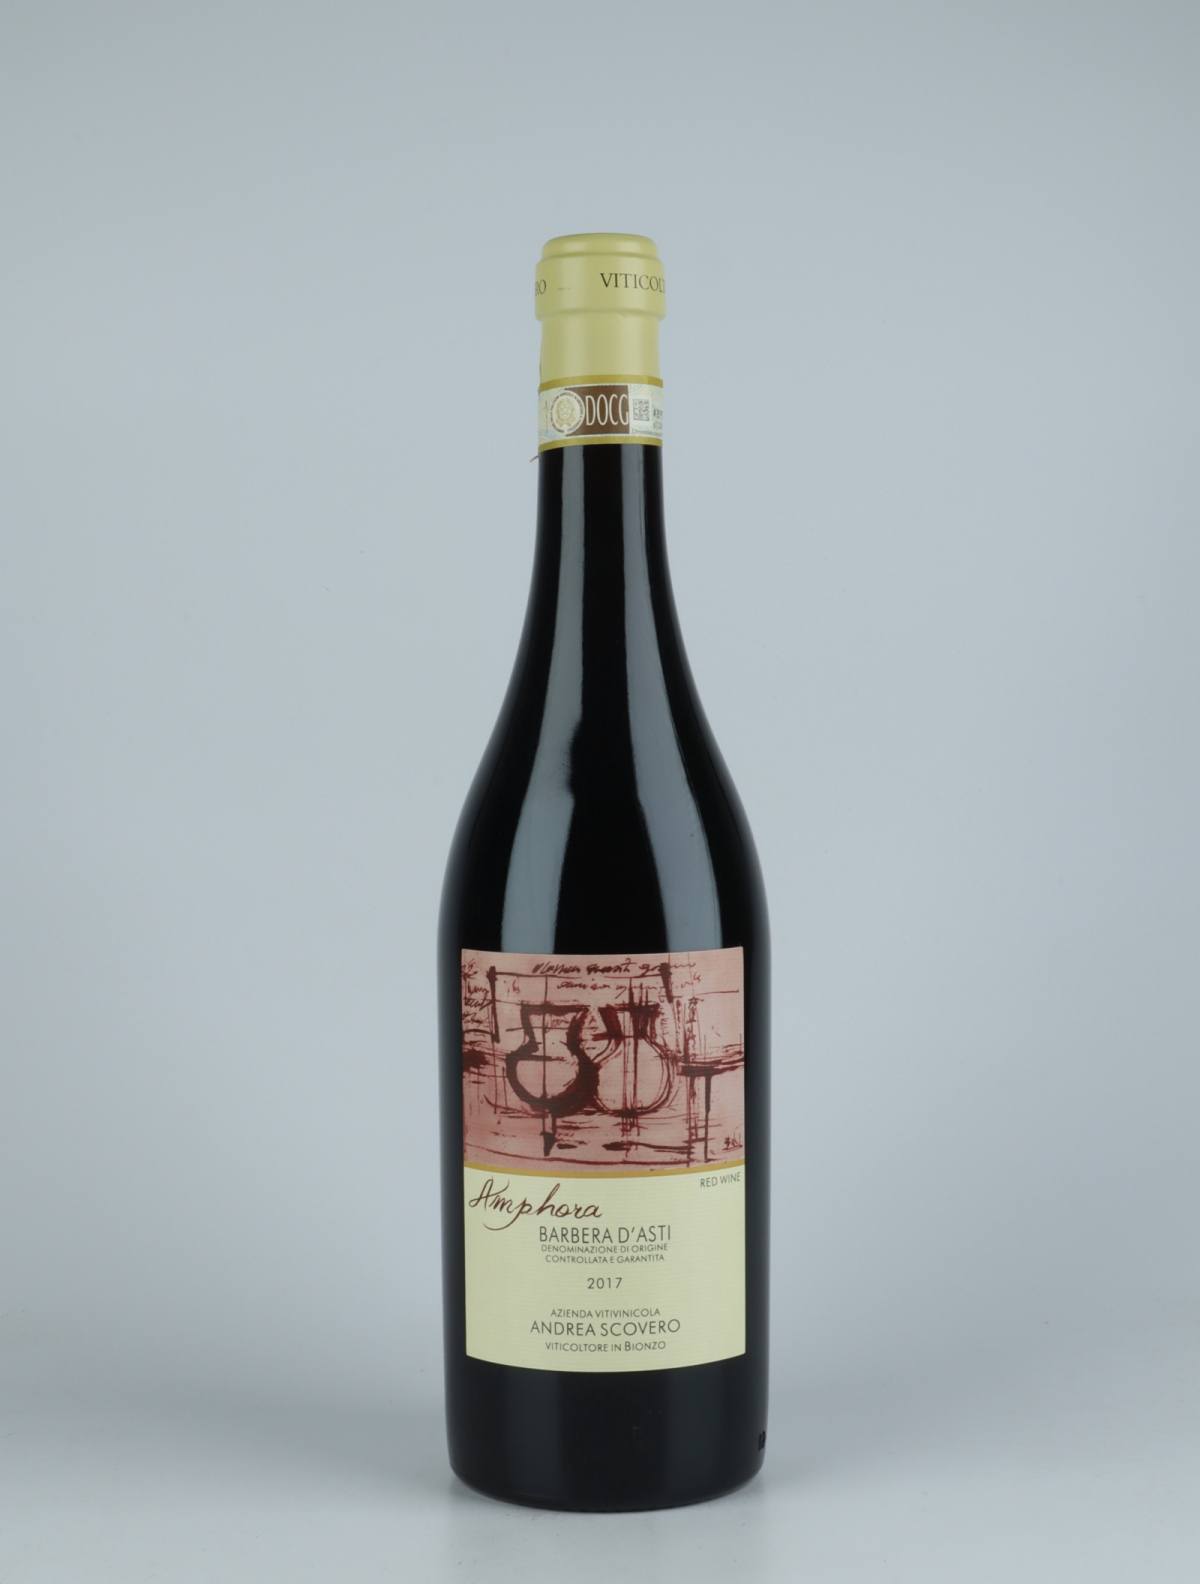 A bottle 2017 Barbera d'Asti - Amphora Red wine from Andrea Scovero, Piedmont in Italy